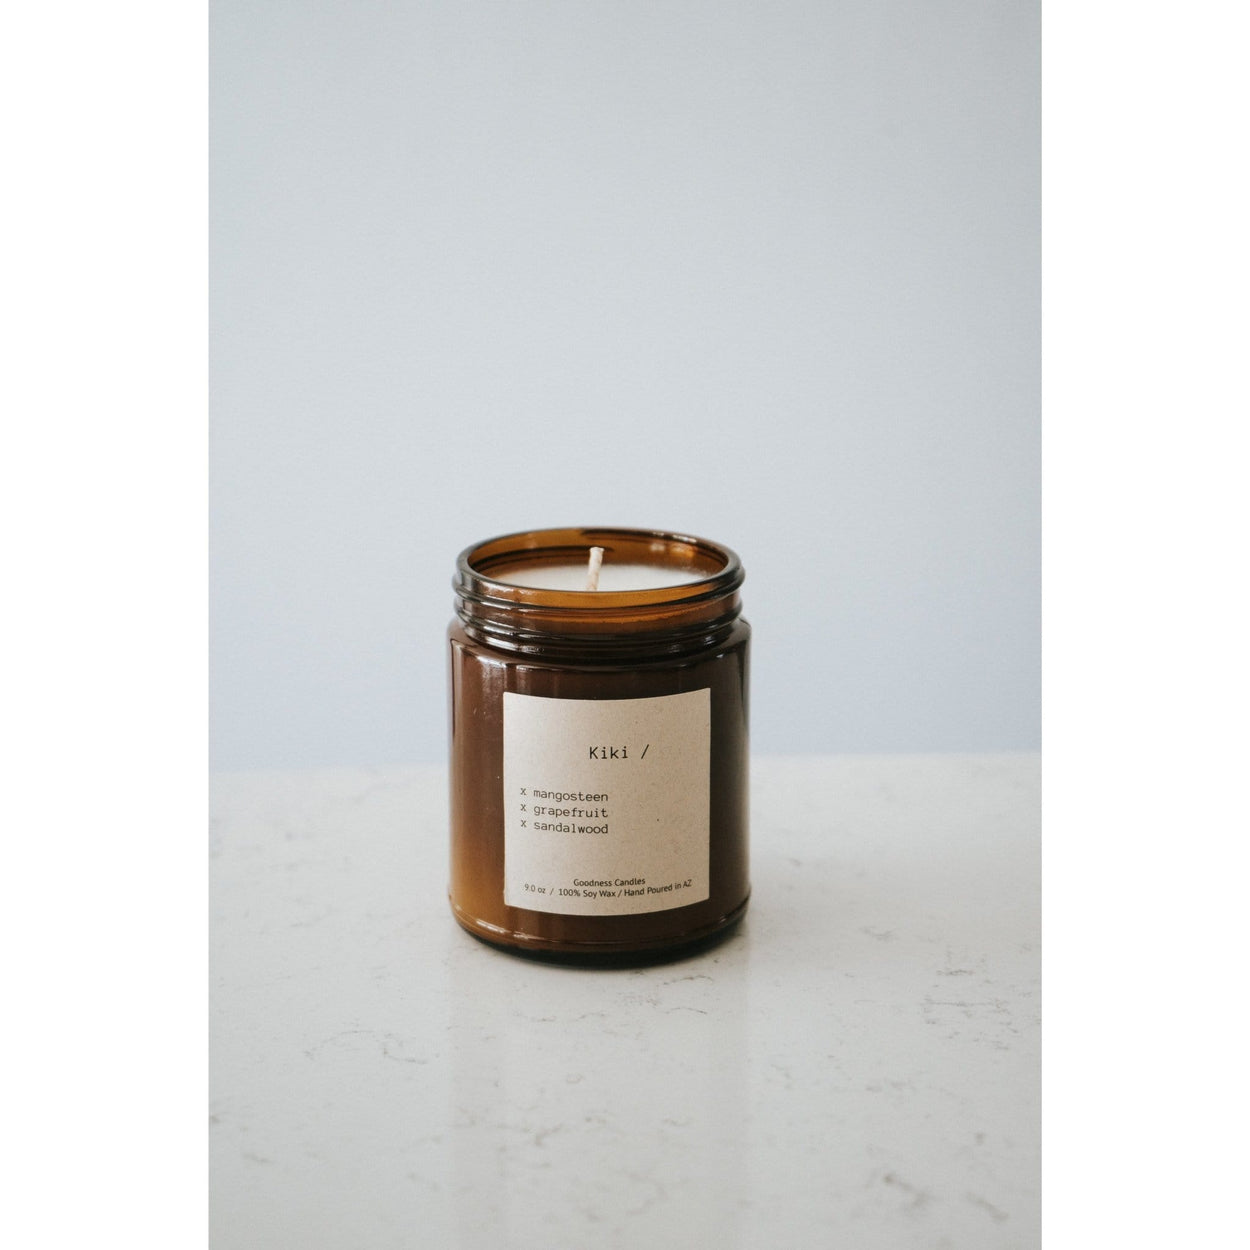 Kiki candle has a calming citrus aroma smell with a smooth